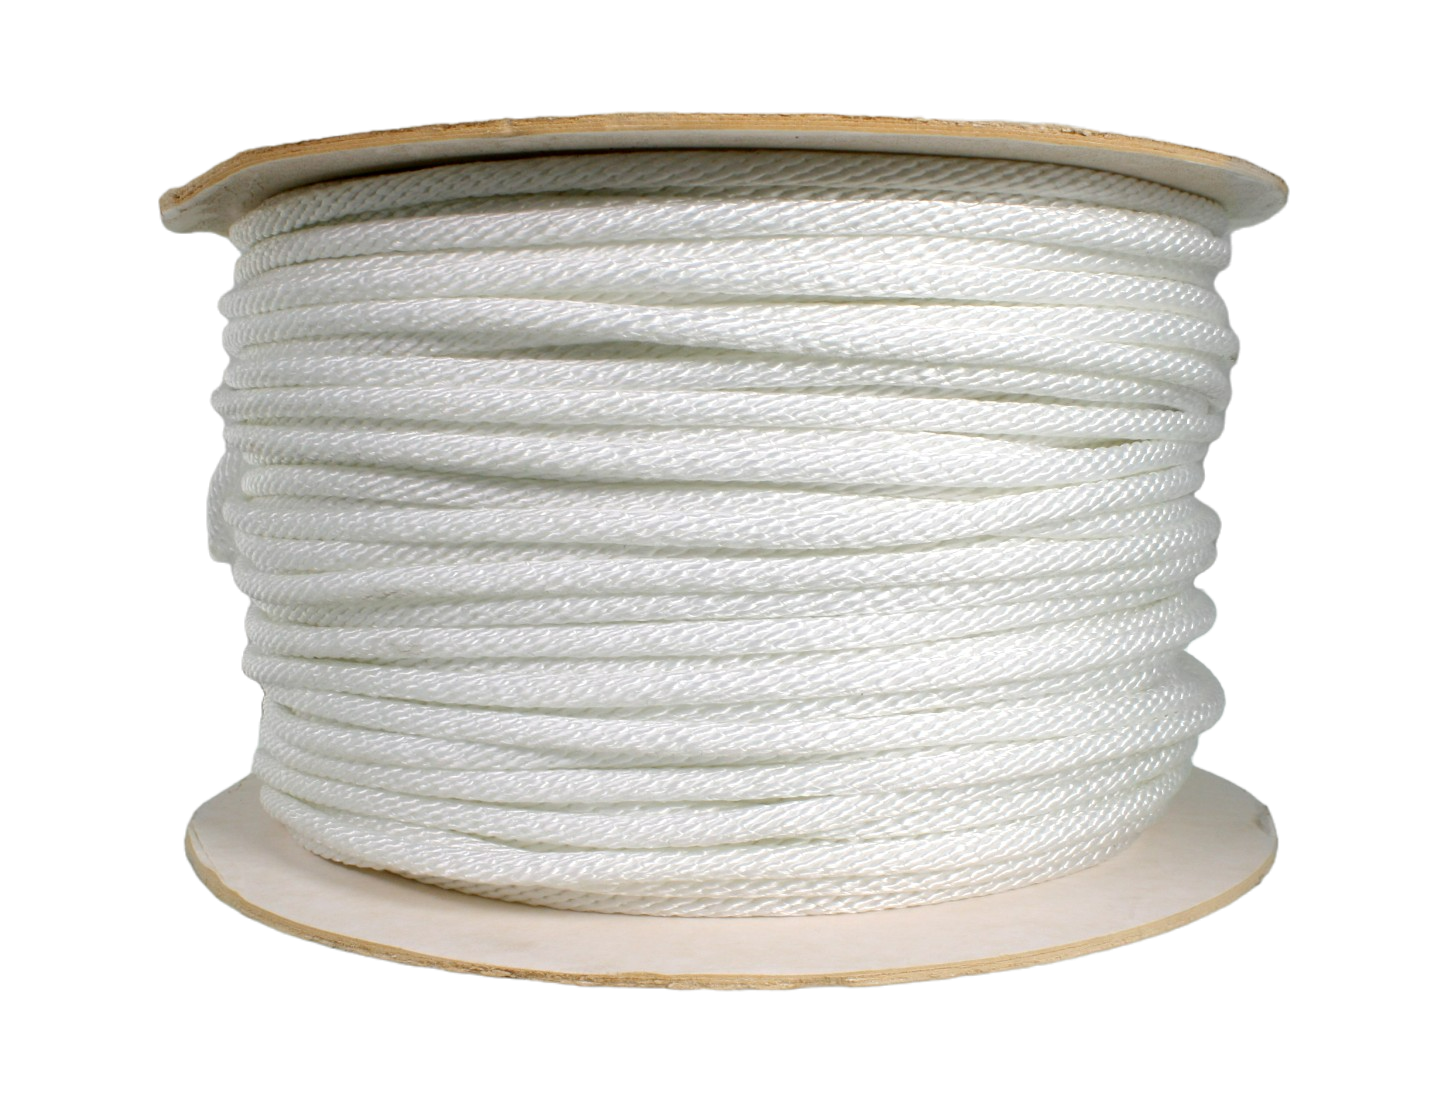 A roll of white sash cord.